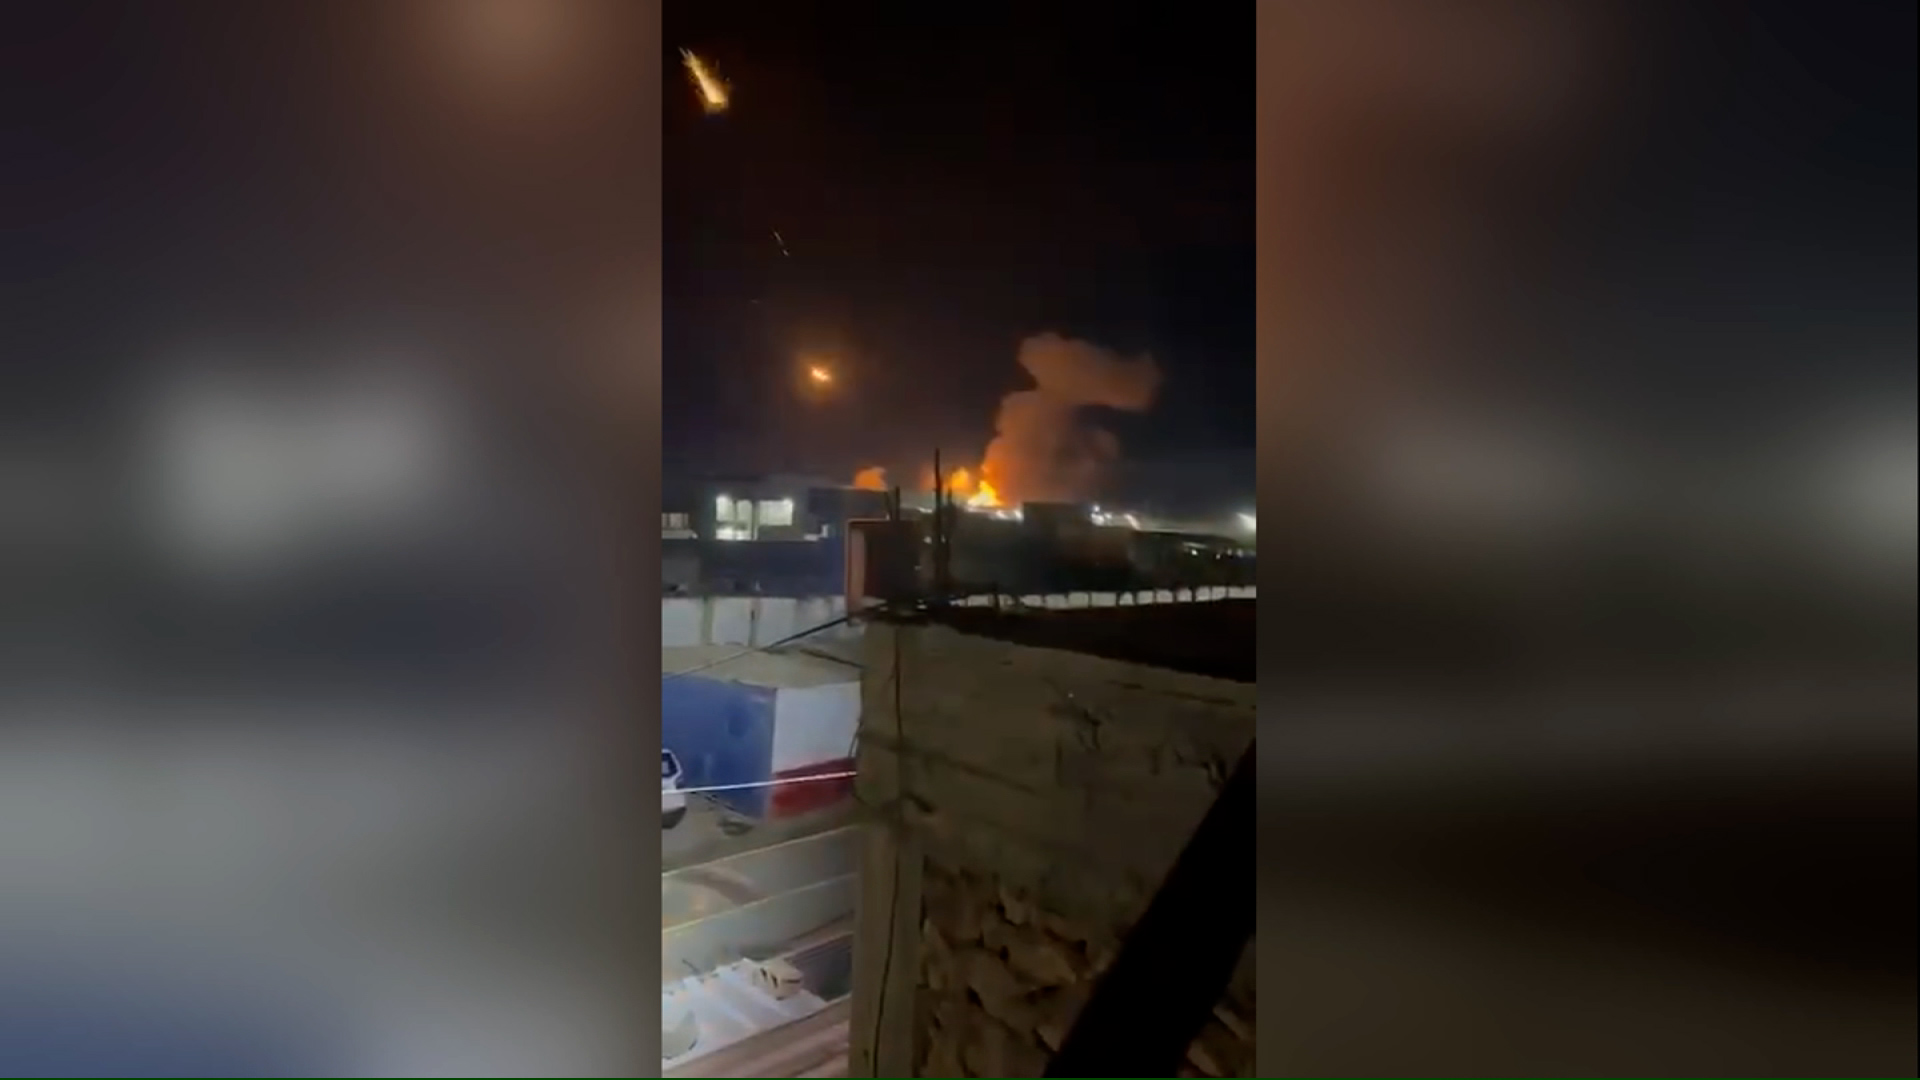 A screengrab from a video, geolocated by CNN to the town of Qaim, Iraq, shows the aftermath of US military strikes in the area according to the Iraqi Military. An apparent weapons depot has been hit, and a number of flares from projectiles are seeing rocketing into the sky.